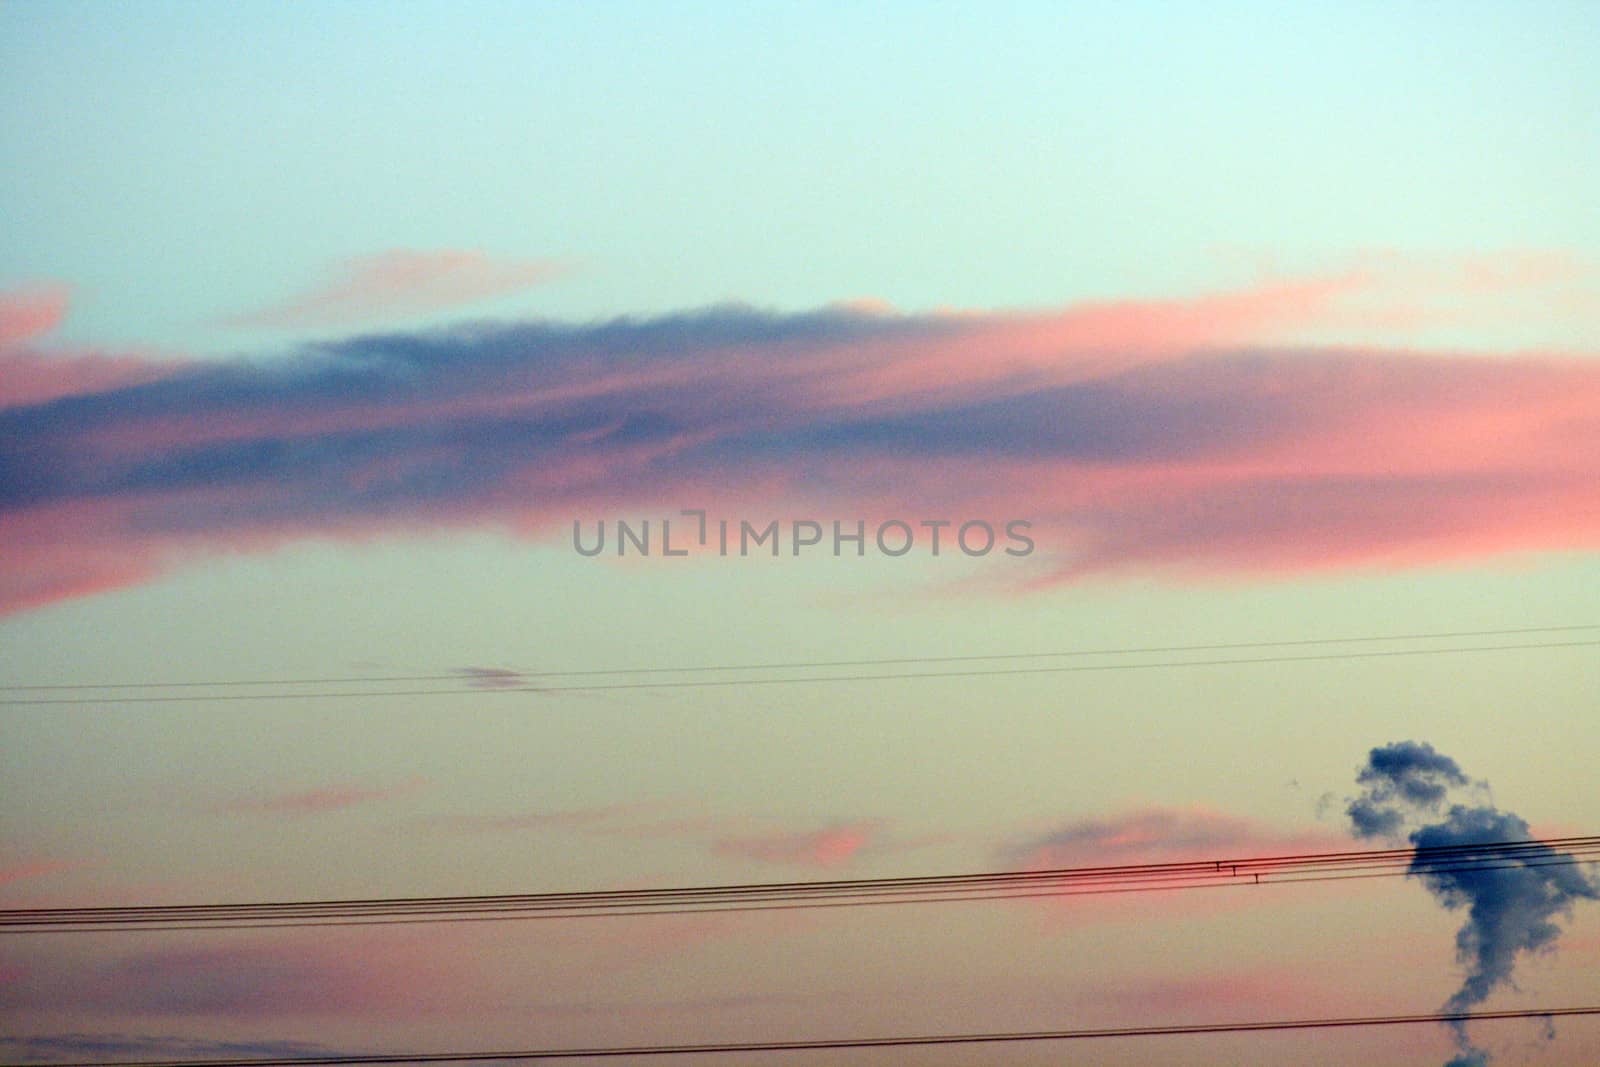 Clouds at sunset through powerline - with small cloud shaped like South America in the lower right corner